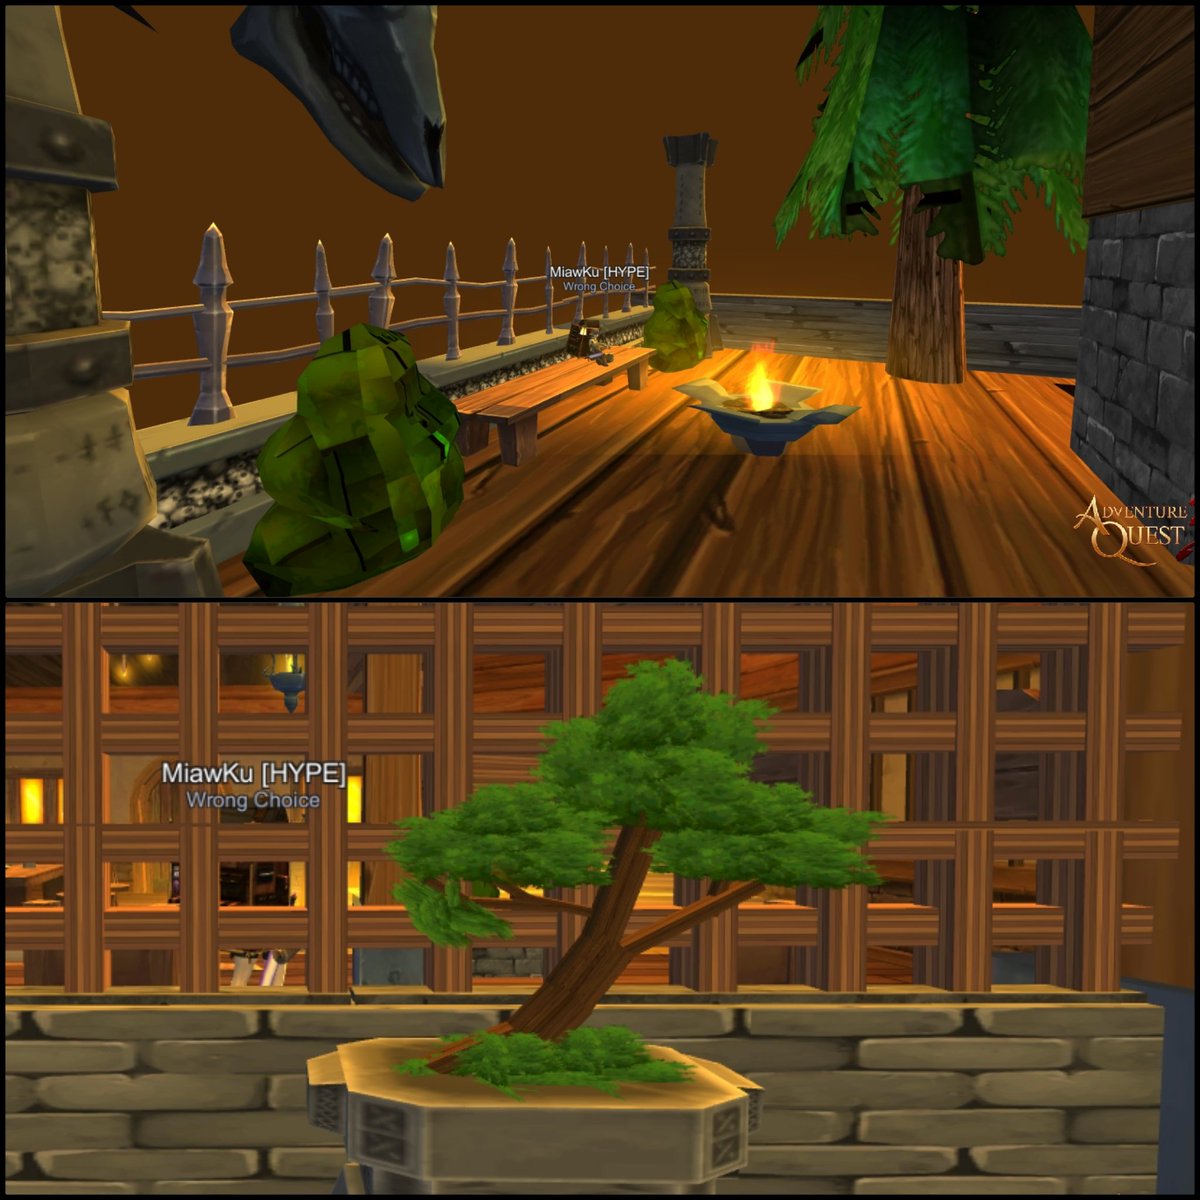 😌😌My house.. 🏠🌲🌳 Still working.. But I like this.. 😆😆 I like my bonsai.. 🥺🌳 And I really want flowers for decorating. 🙃🙃 Visit public : Pixie Hollow #aq3d #hypebeastguild